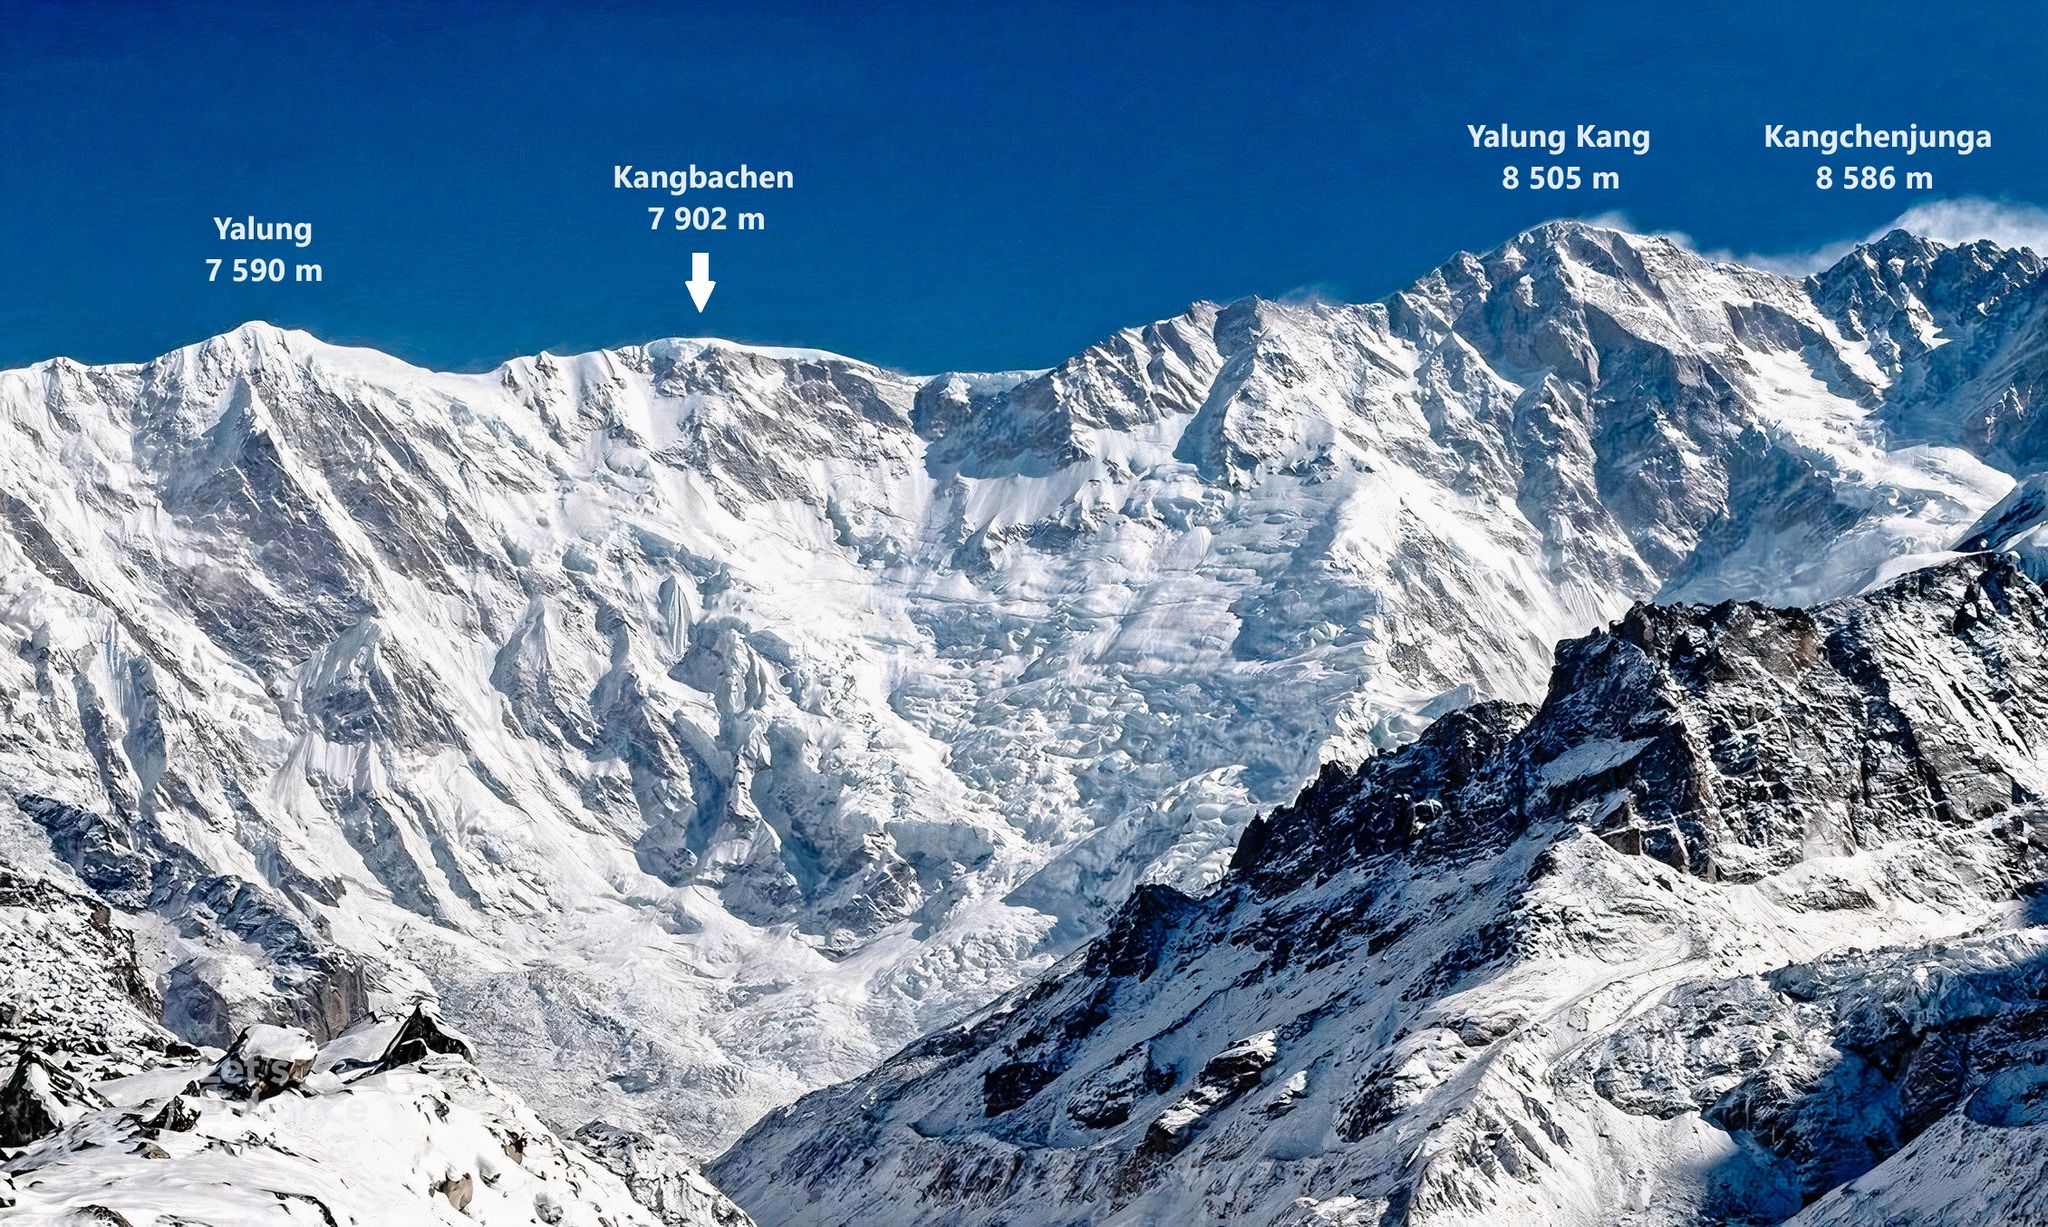 General view of Kangchenjunga massif, with 4 points marked.